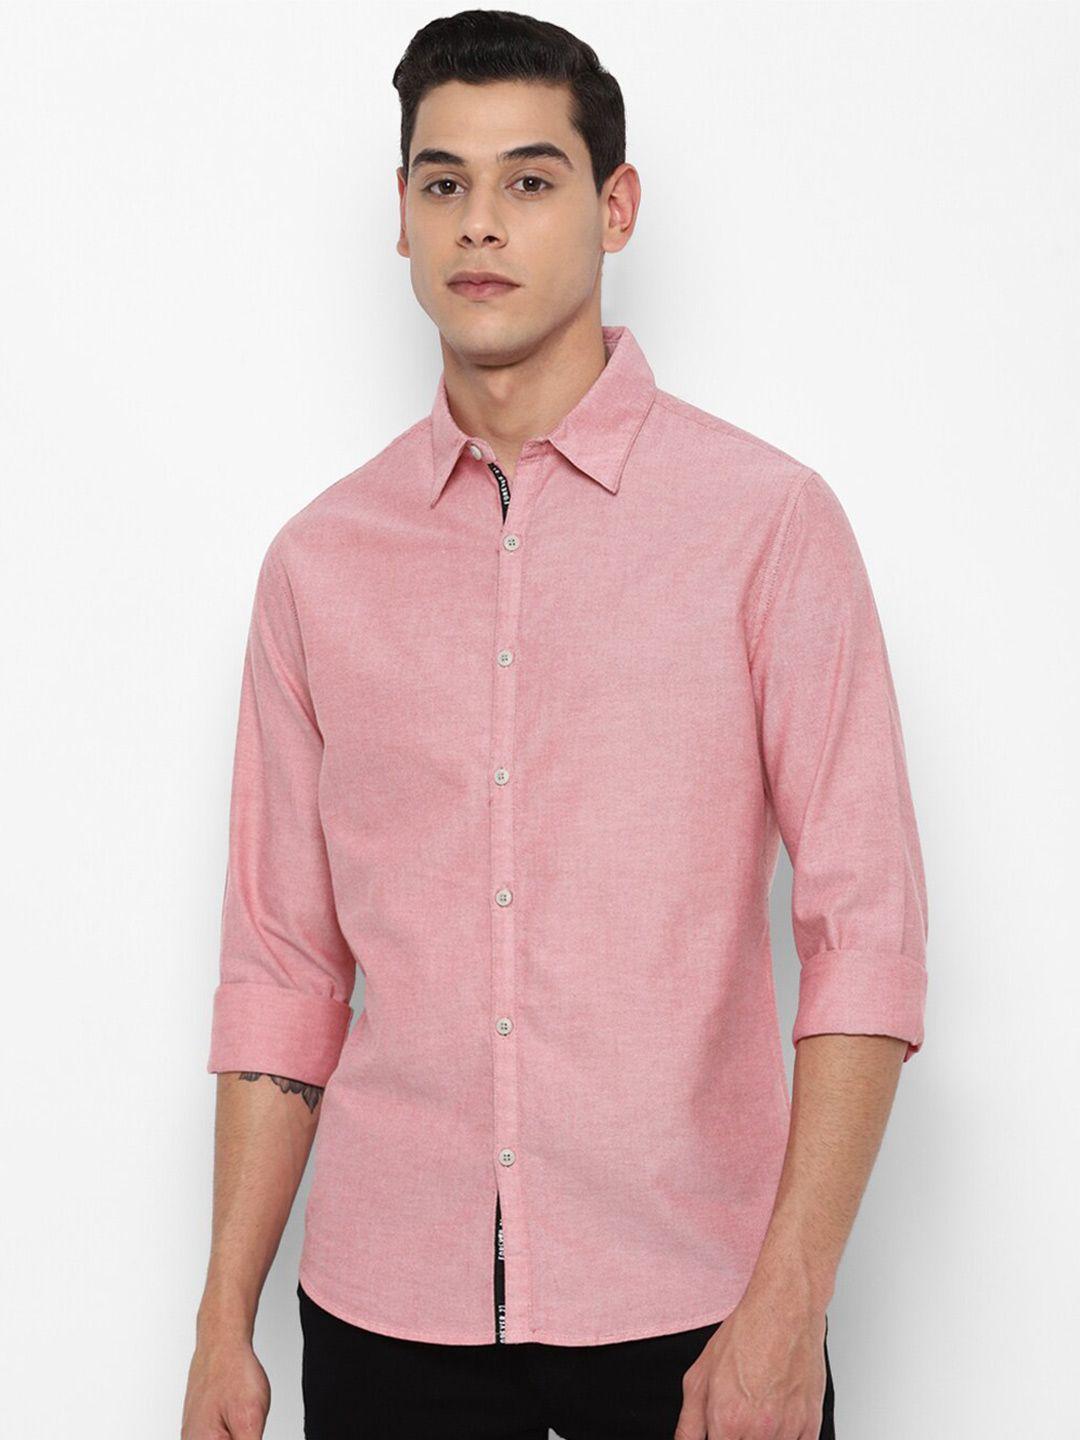 forever-21-men-pink-solid-casual-shirt